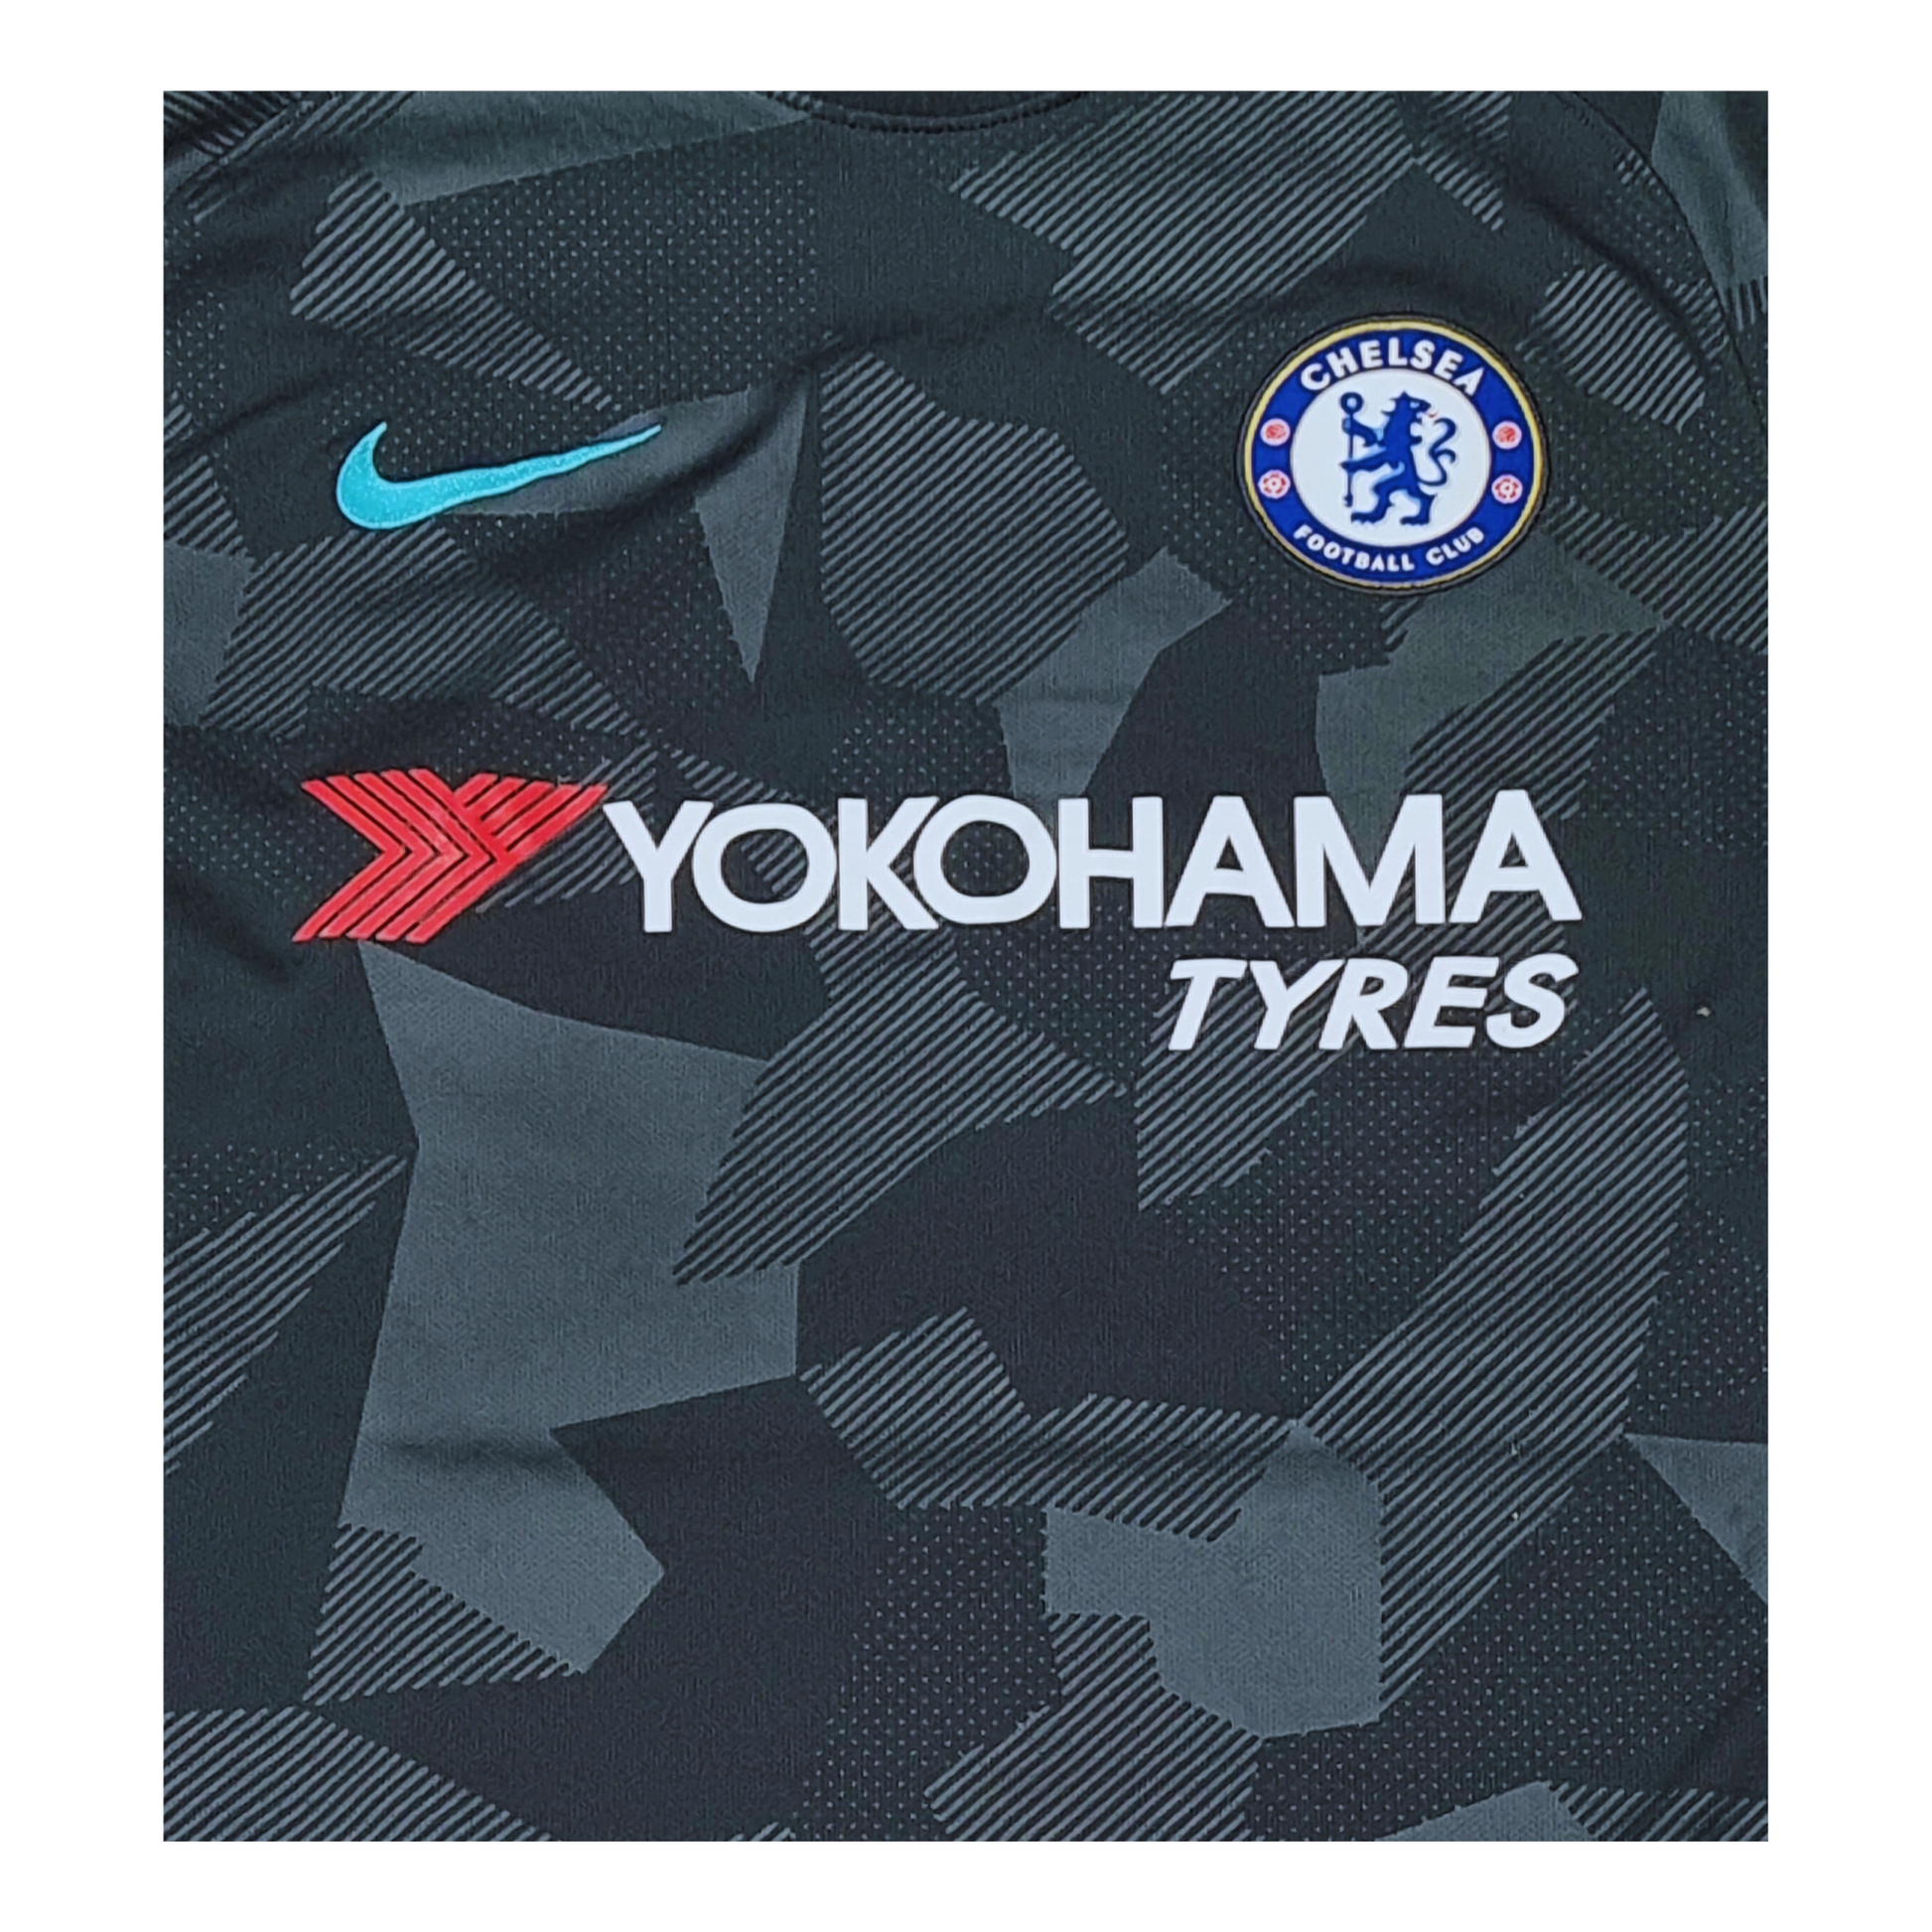 A camouflage-patterned Chelsea 2017/18 Third Jersey. [Brand Name: Nike]